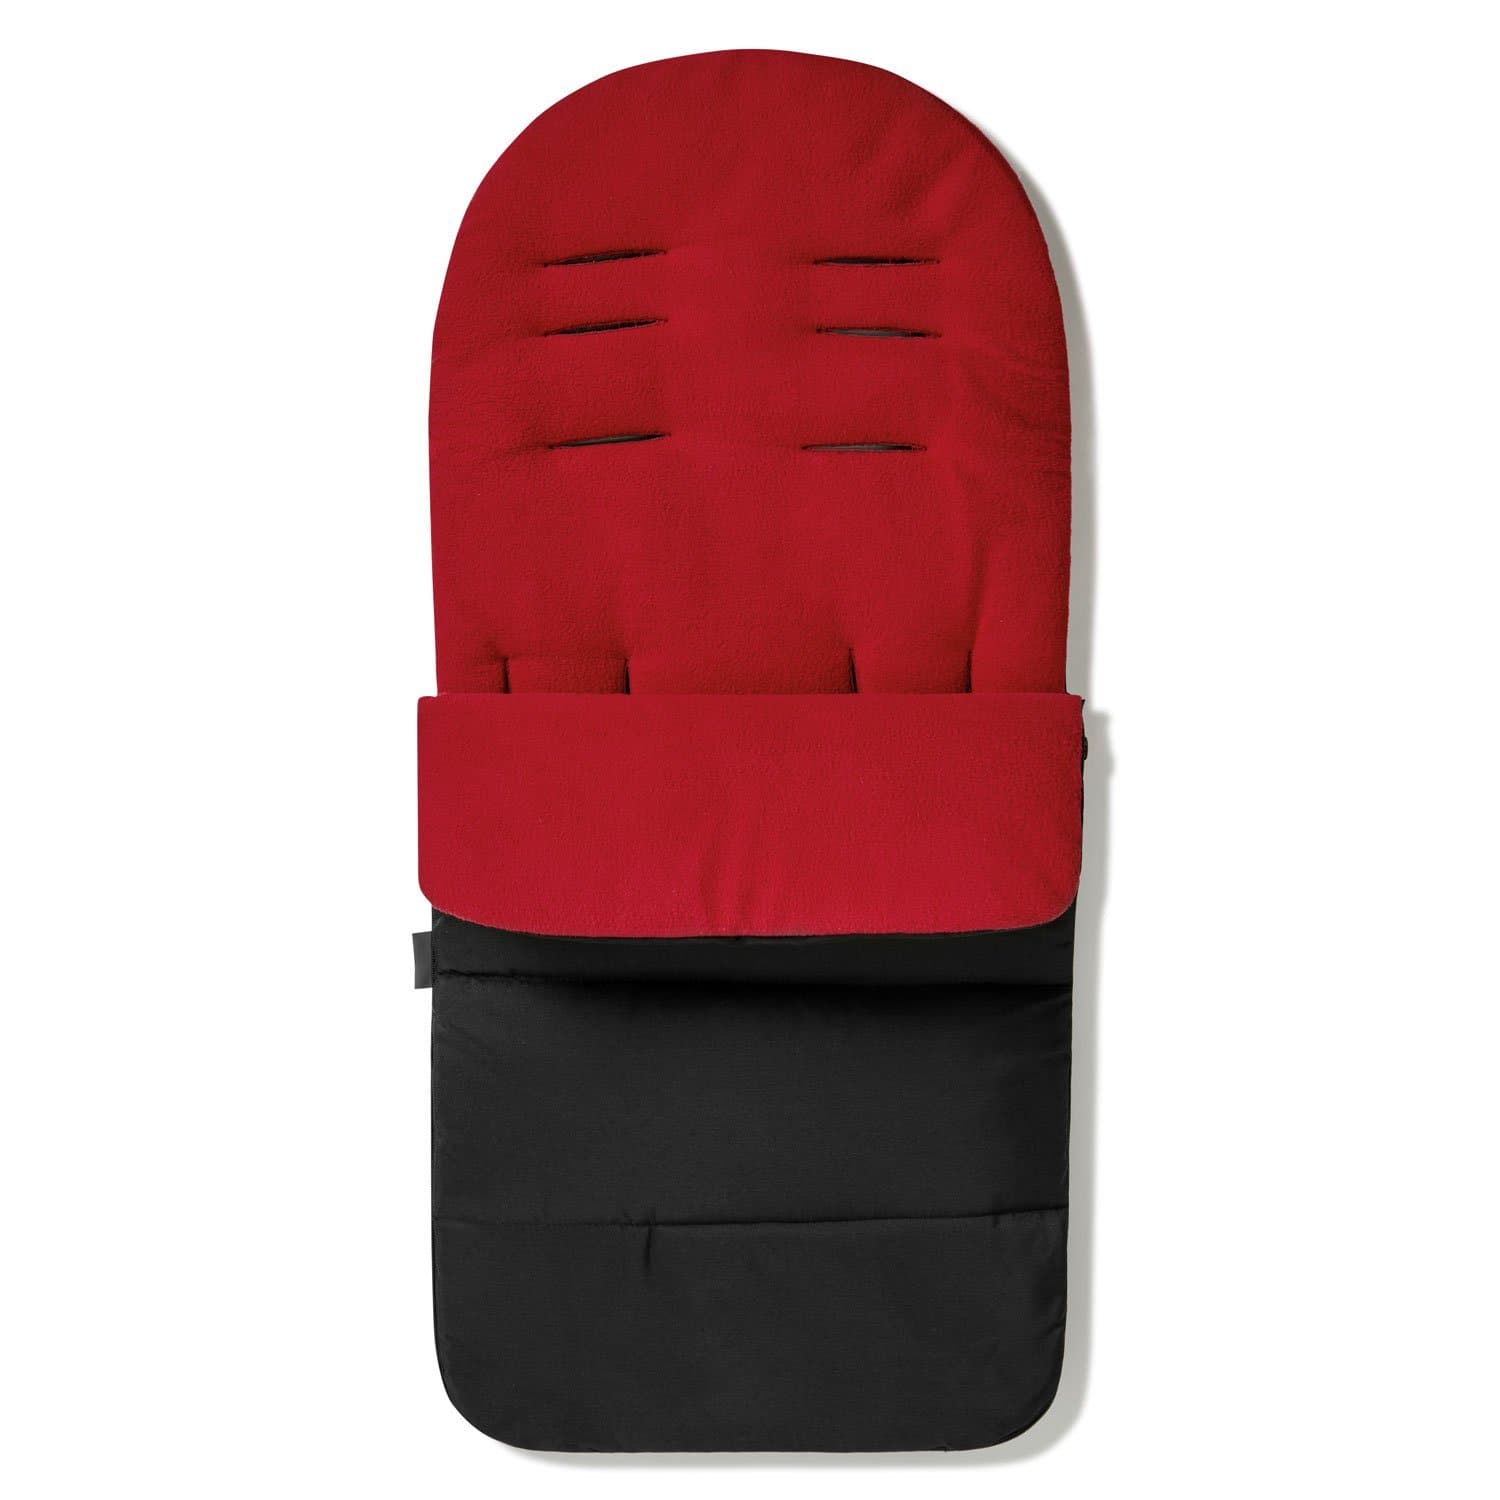 Premium Footmuff / Cosy Toes Compatible with Hauck - Fire Red / Fits All Models | For Your Little One